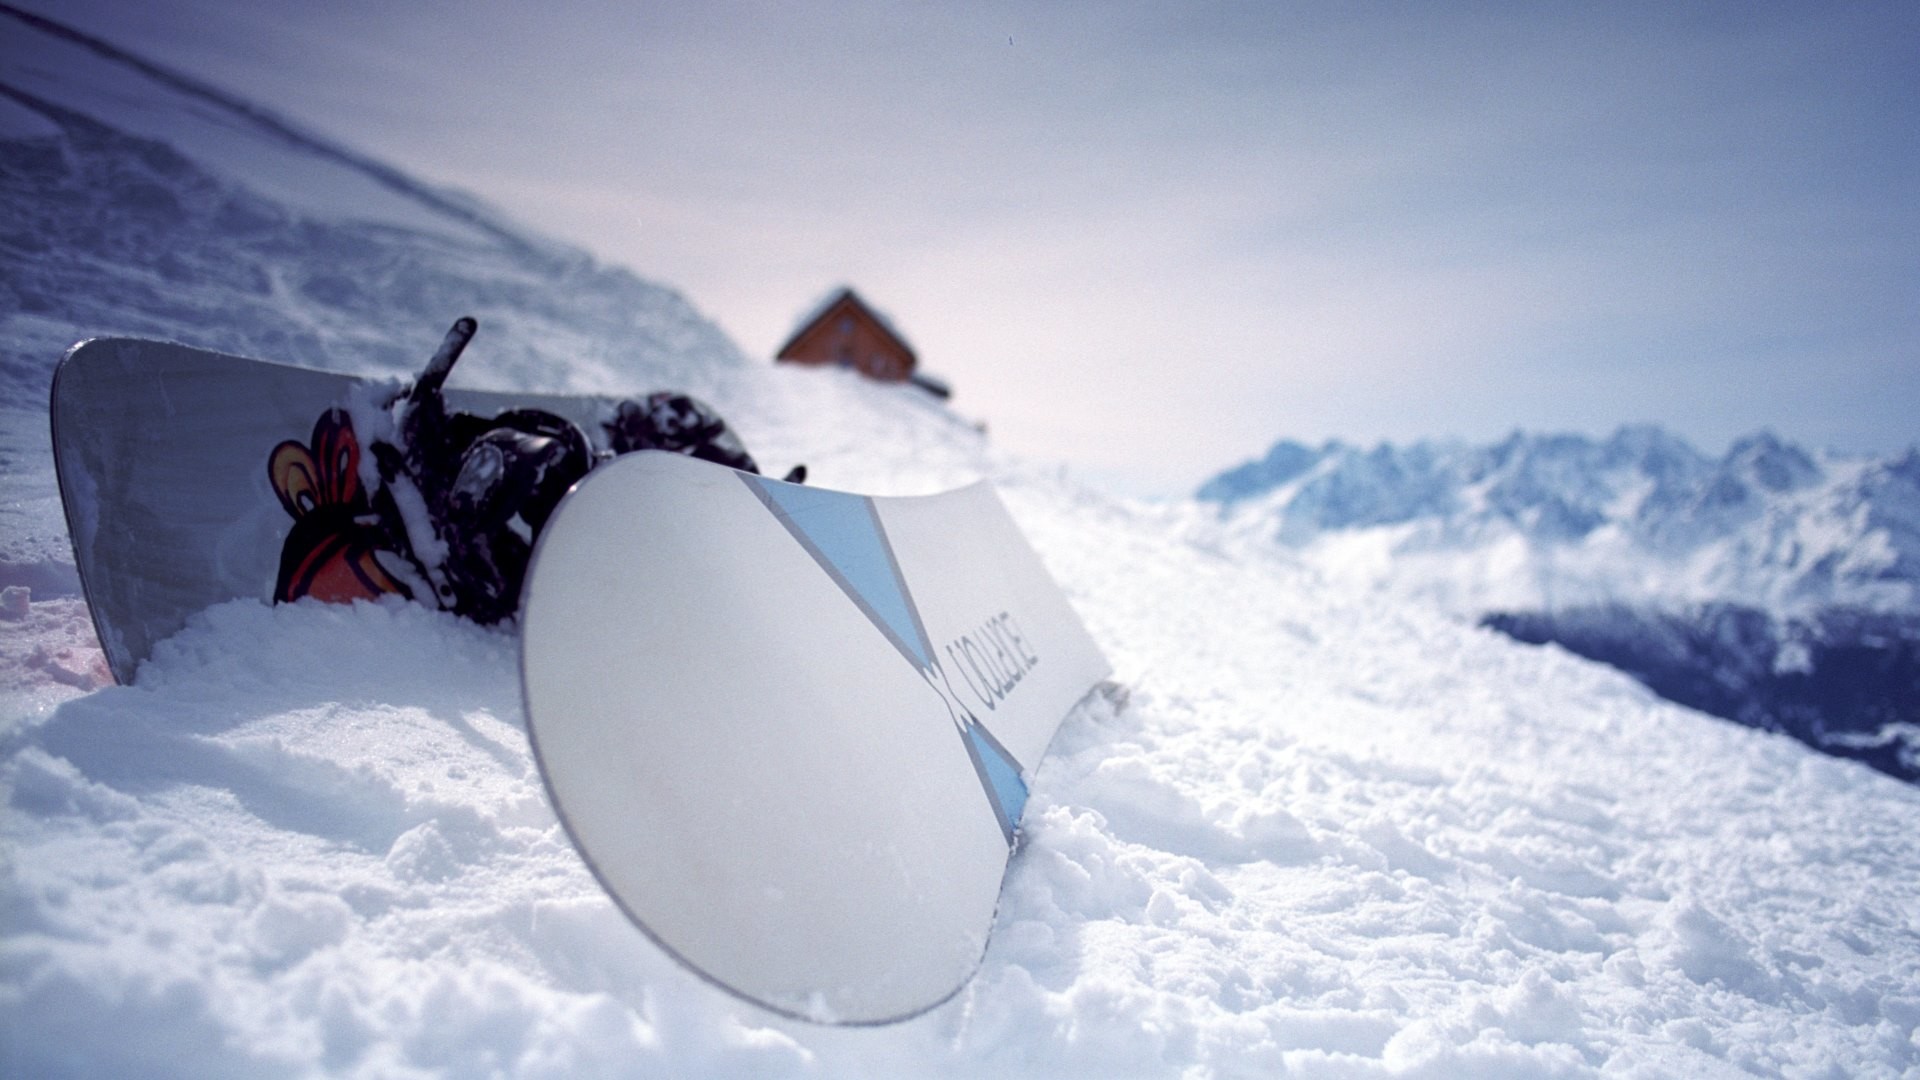 1920x1080 Wallpaper: Ready for Snowboarding. High Definition HD 